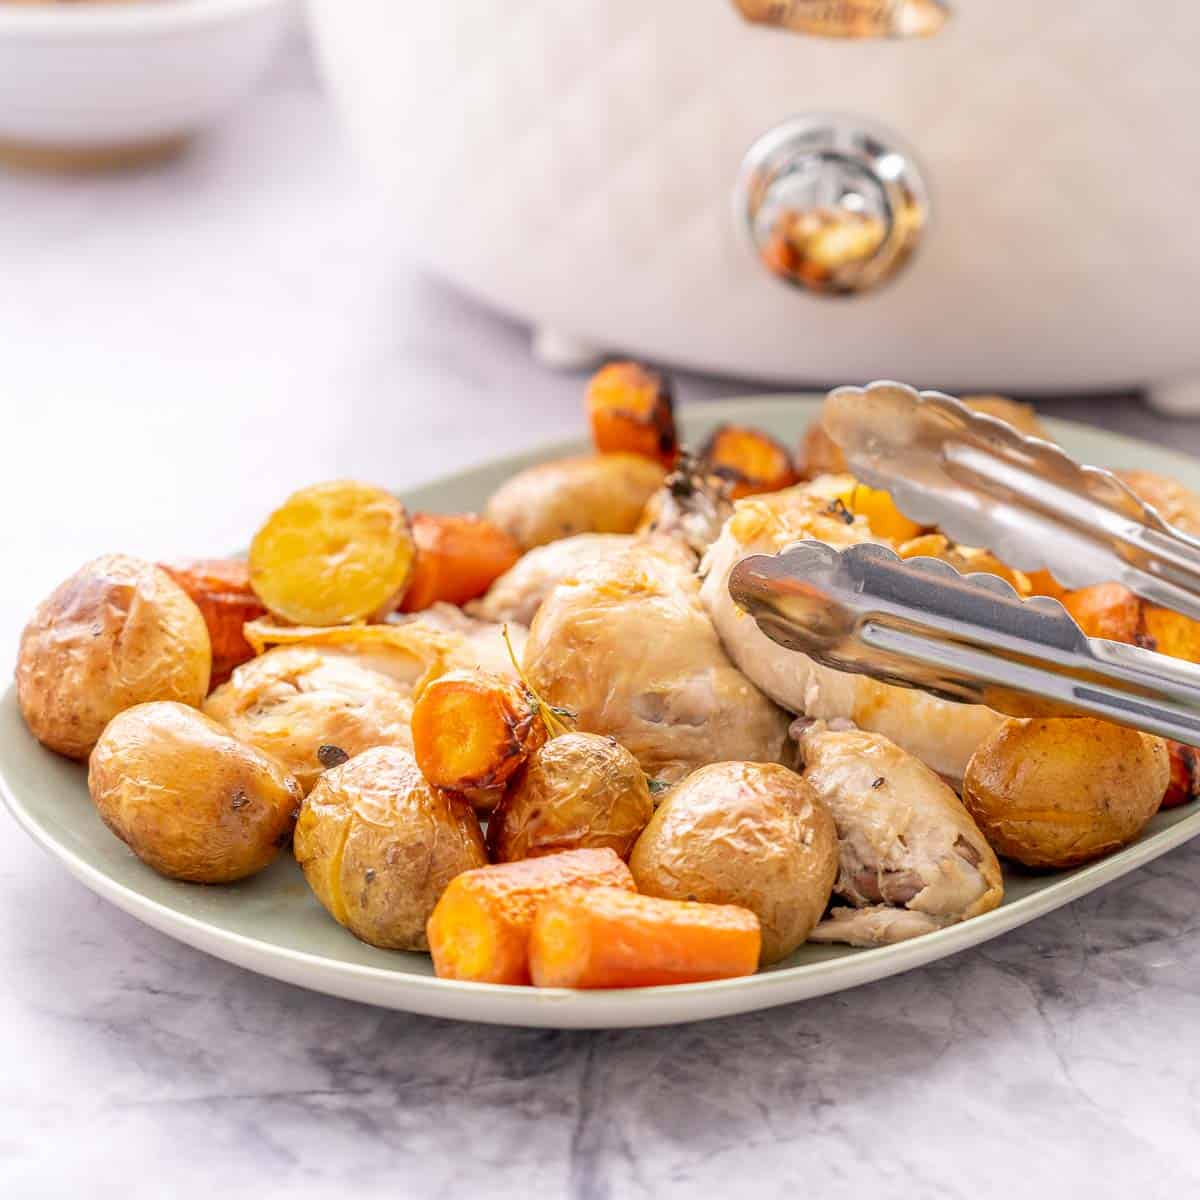 A large serving dish filled with roasted potatoes, carrots and chicken sitting on the bench in front of the croc pot with tongs about to dig in. 